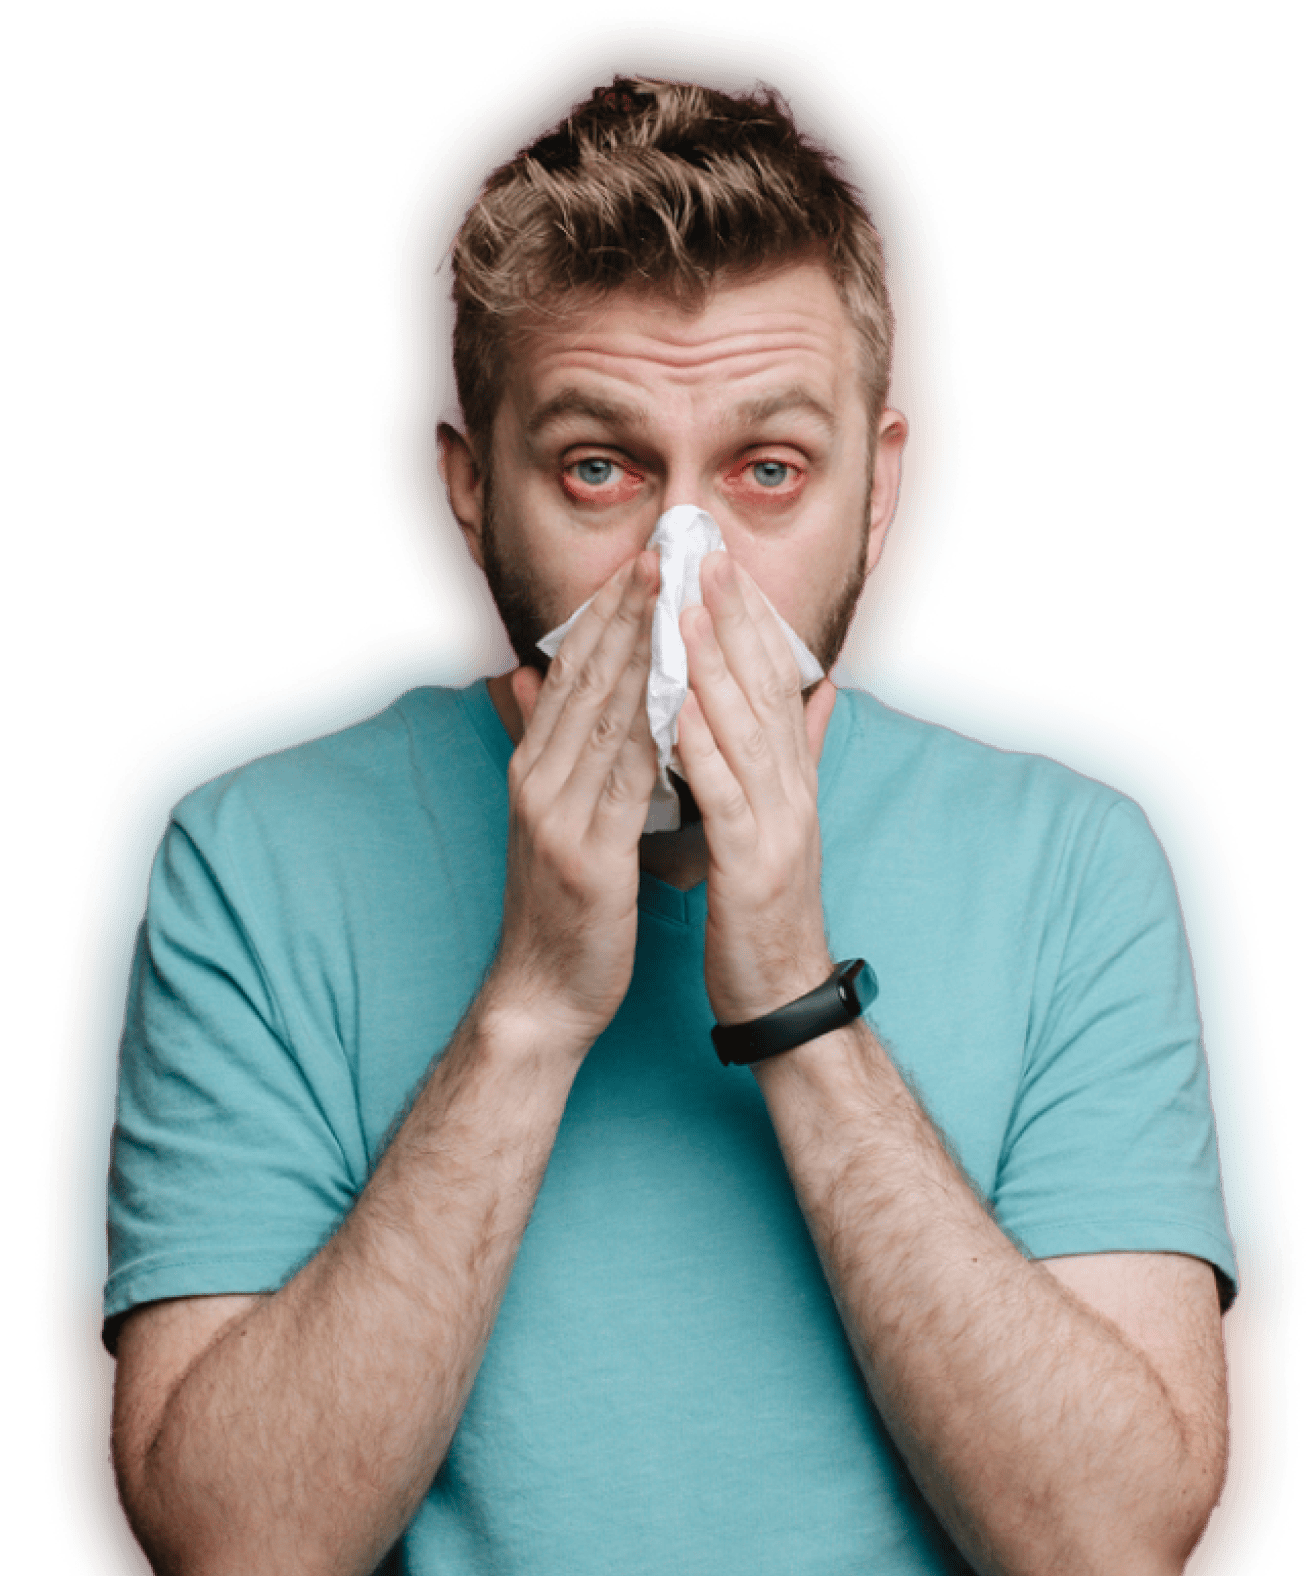 A man in a blue T-shirt with red eyes blows his nose into a tissue.